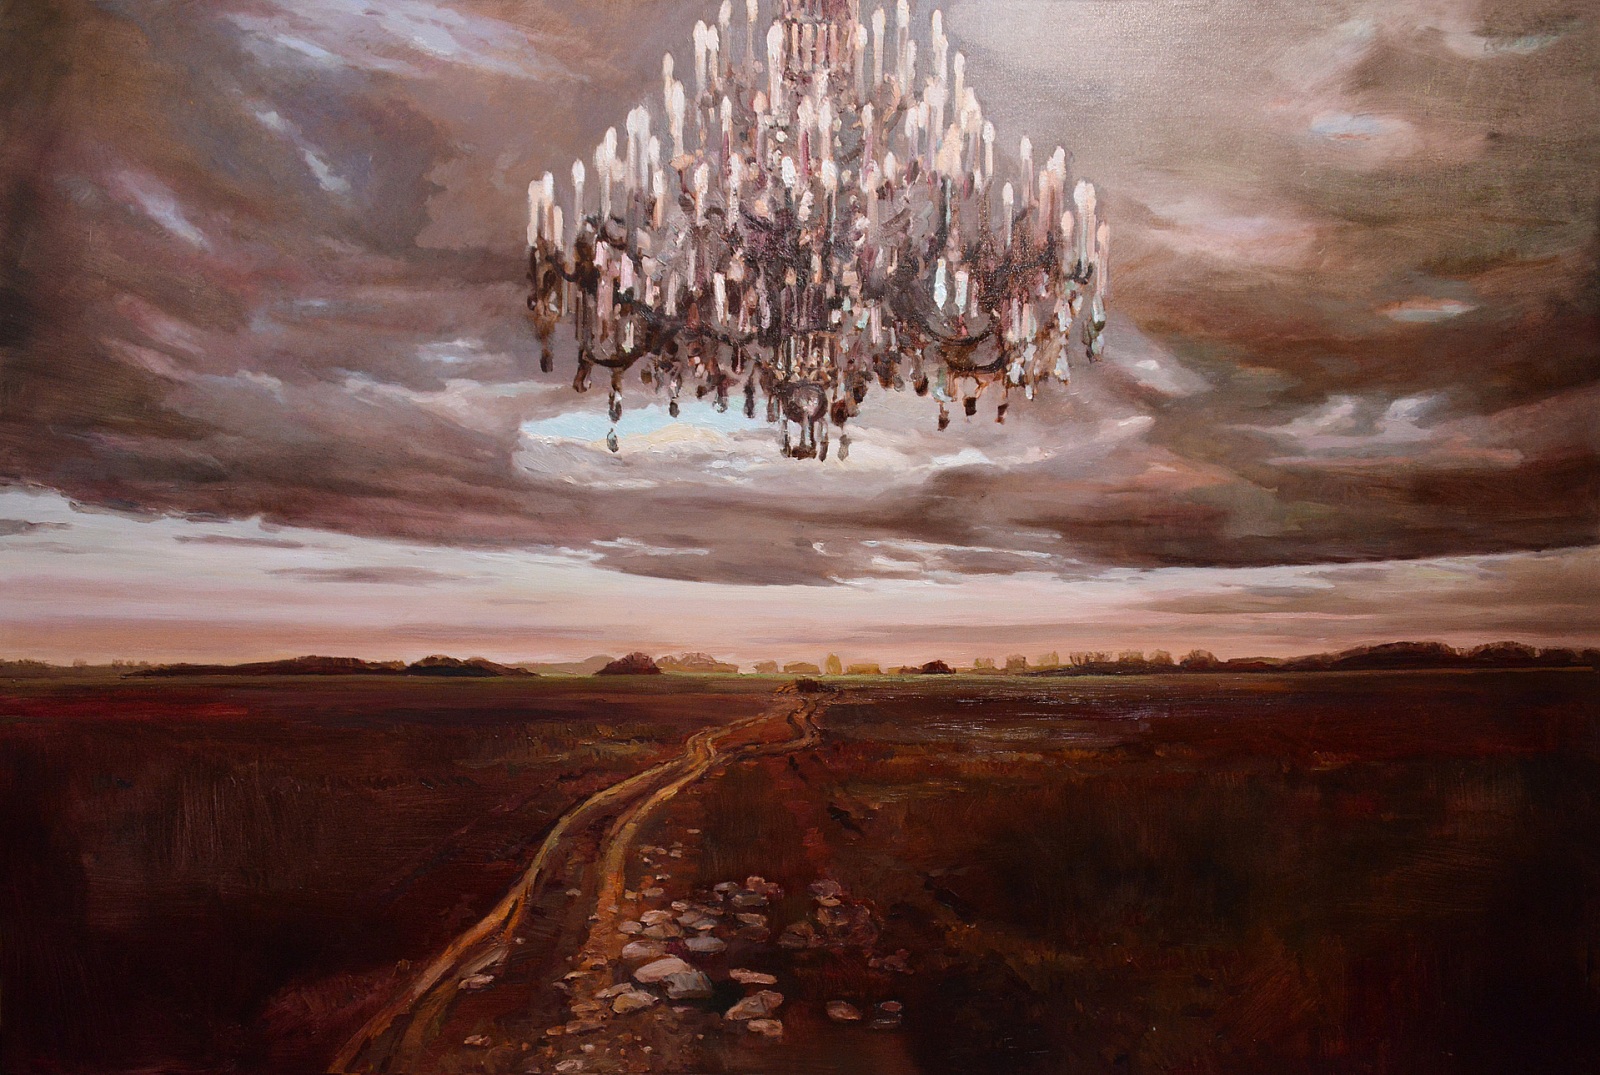 Landscape with Chandelier - 2014, oil on canvas, 160 x 240 cm, private collection, RO - 14